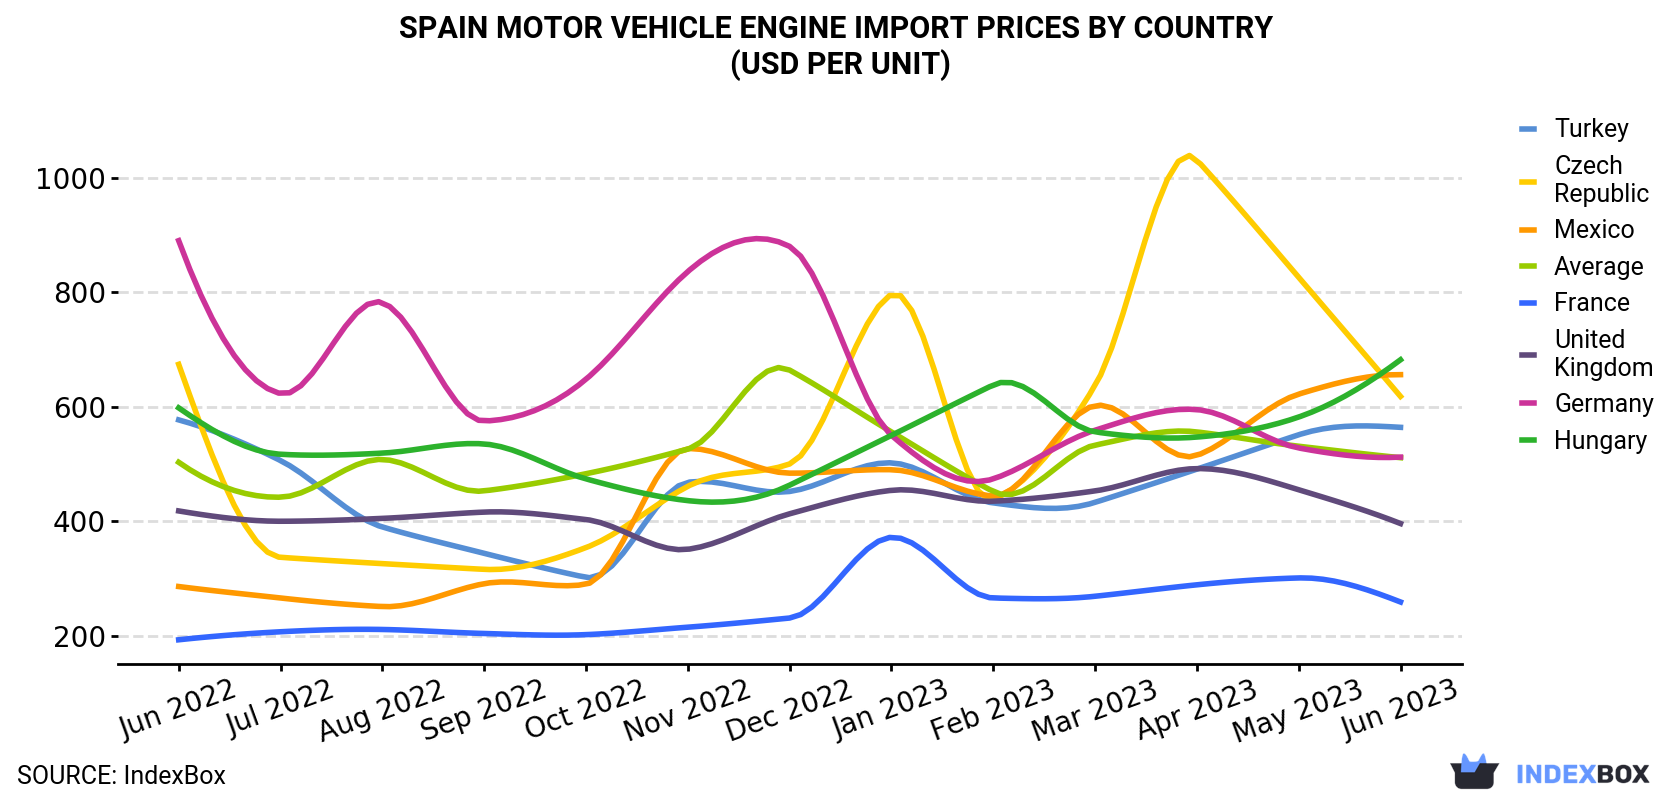 Spain Motor Vehicle Engine Import Prices By Country (USD Per Unit)